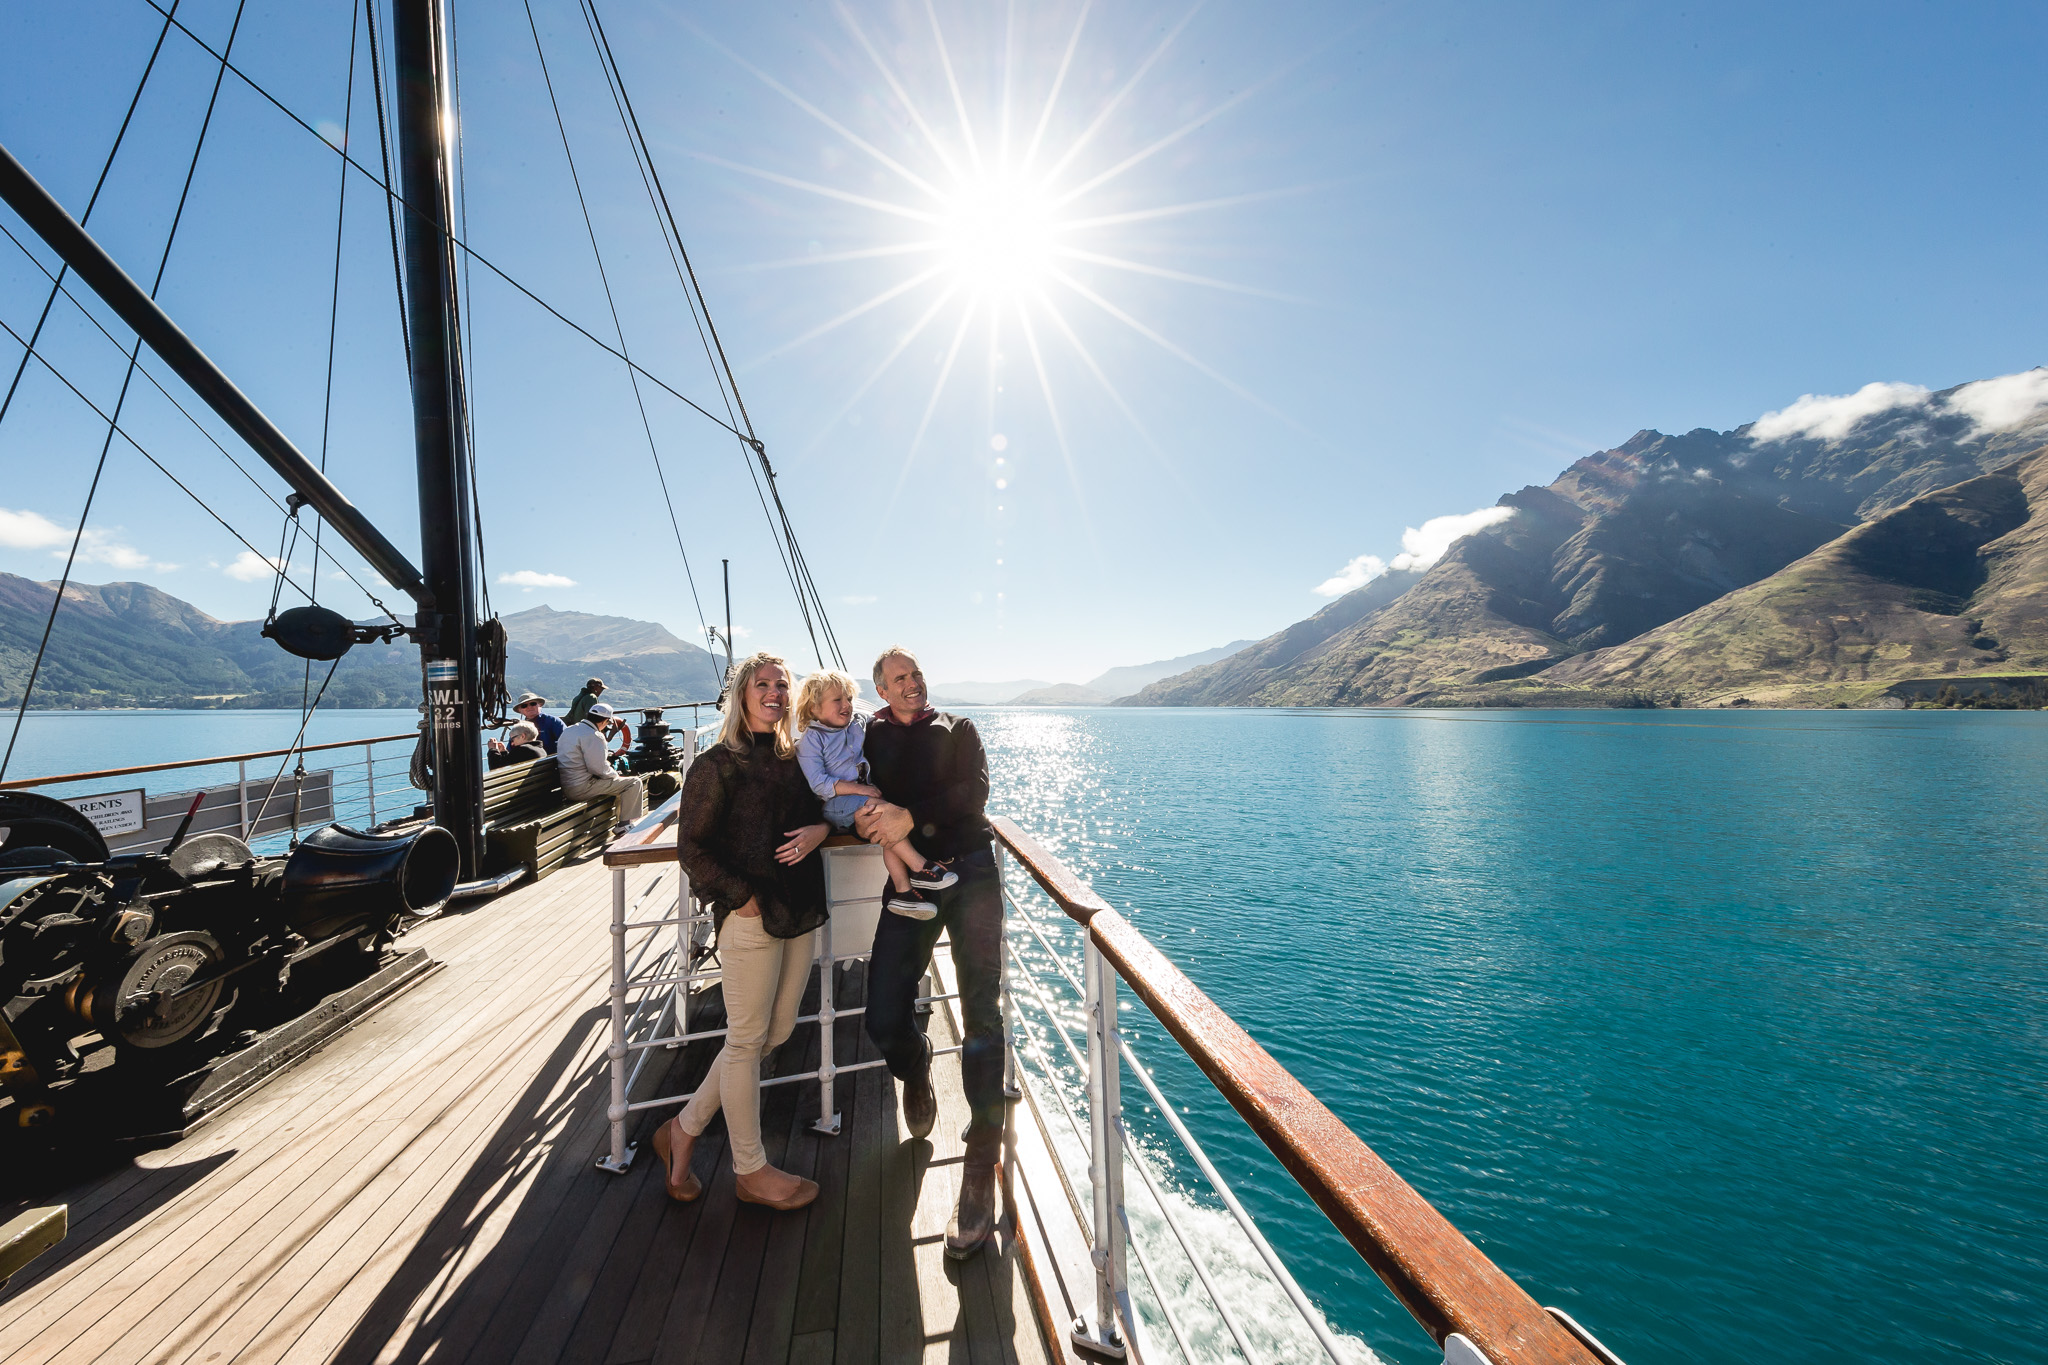 tss earnslaw steamship cruise from queenstown